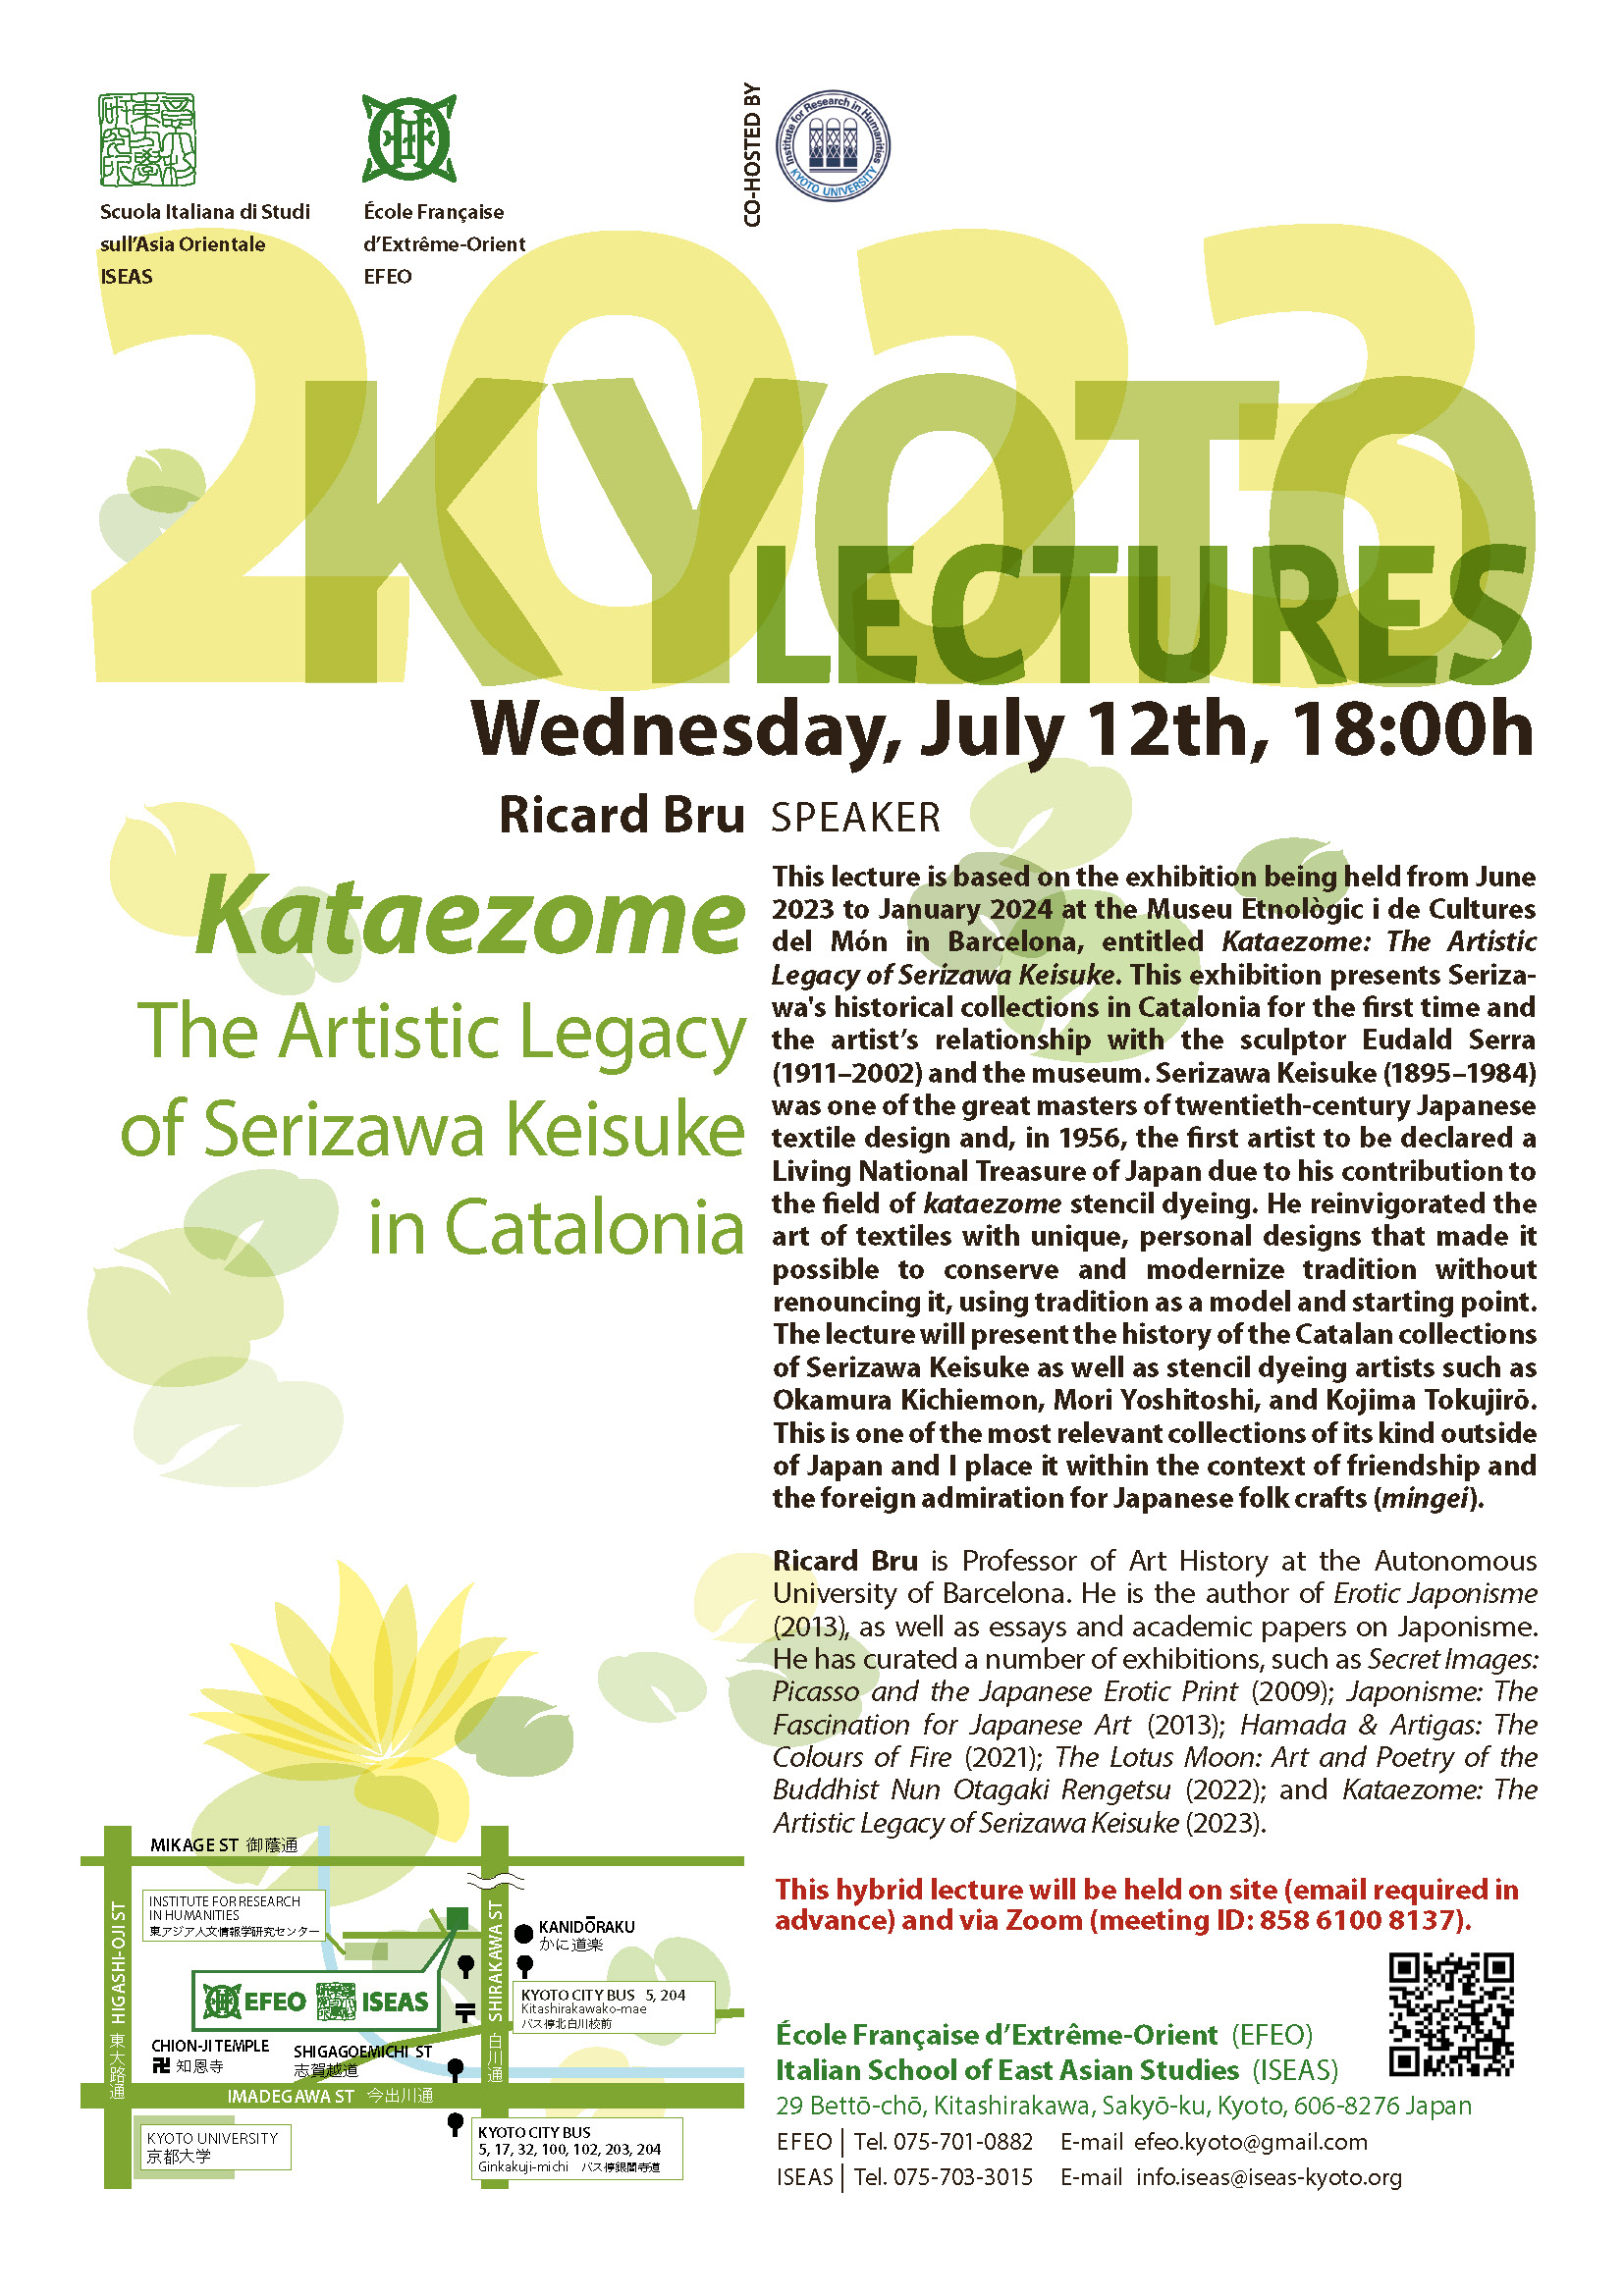 Kyoto Lectures 2023-07-12